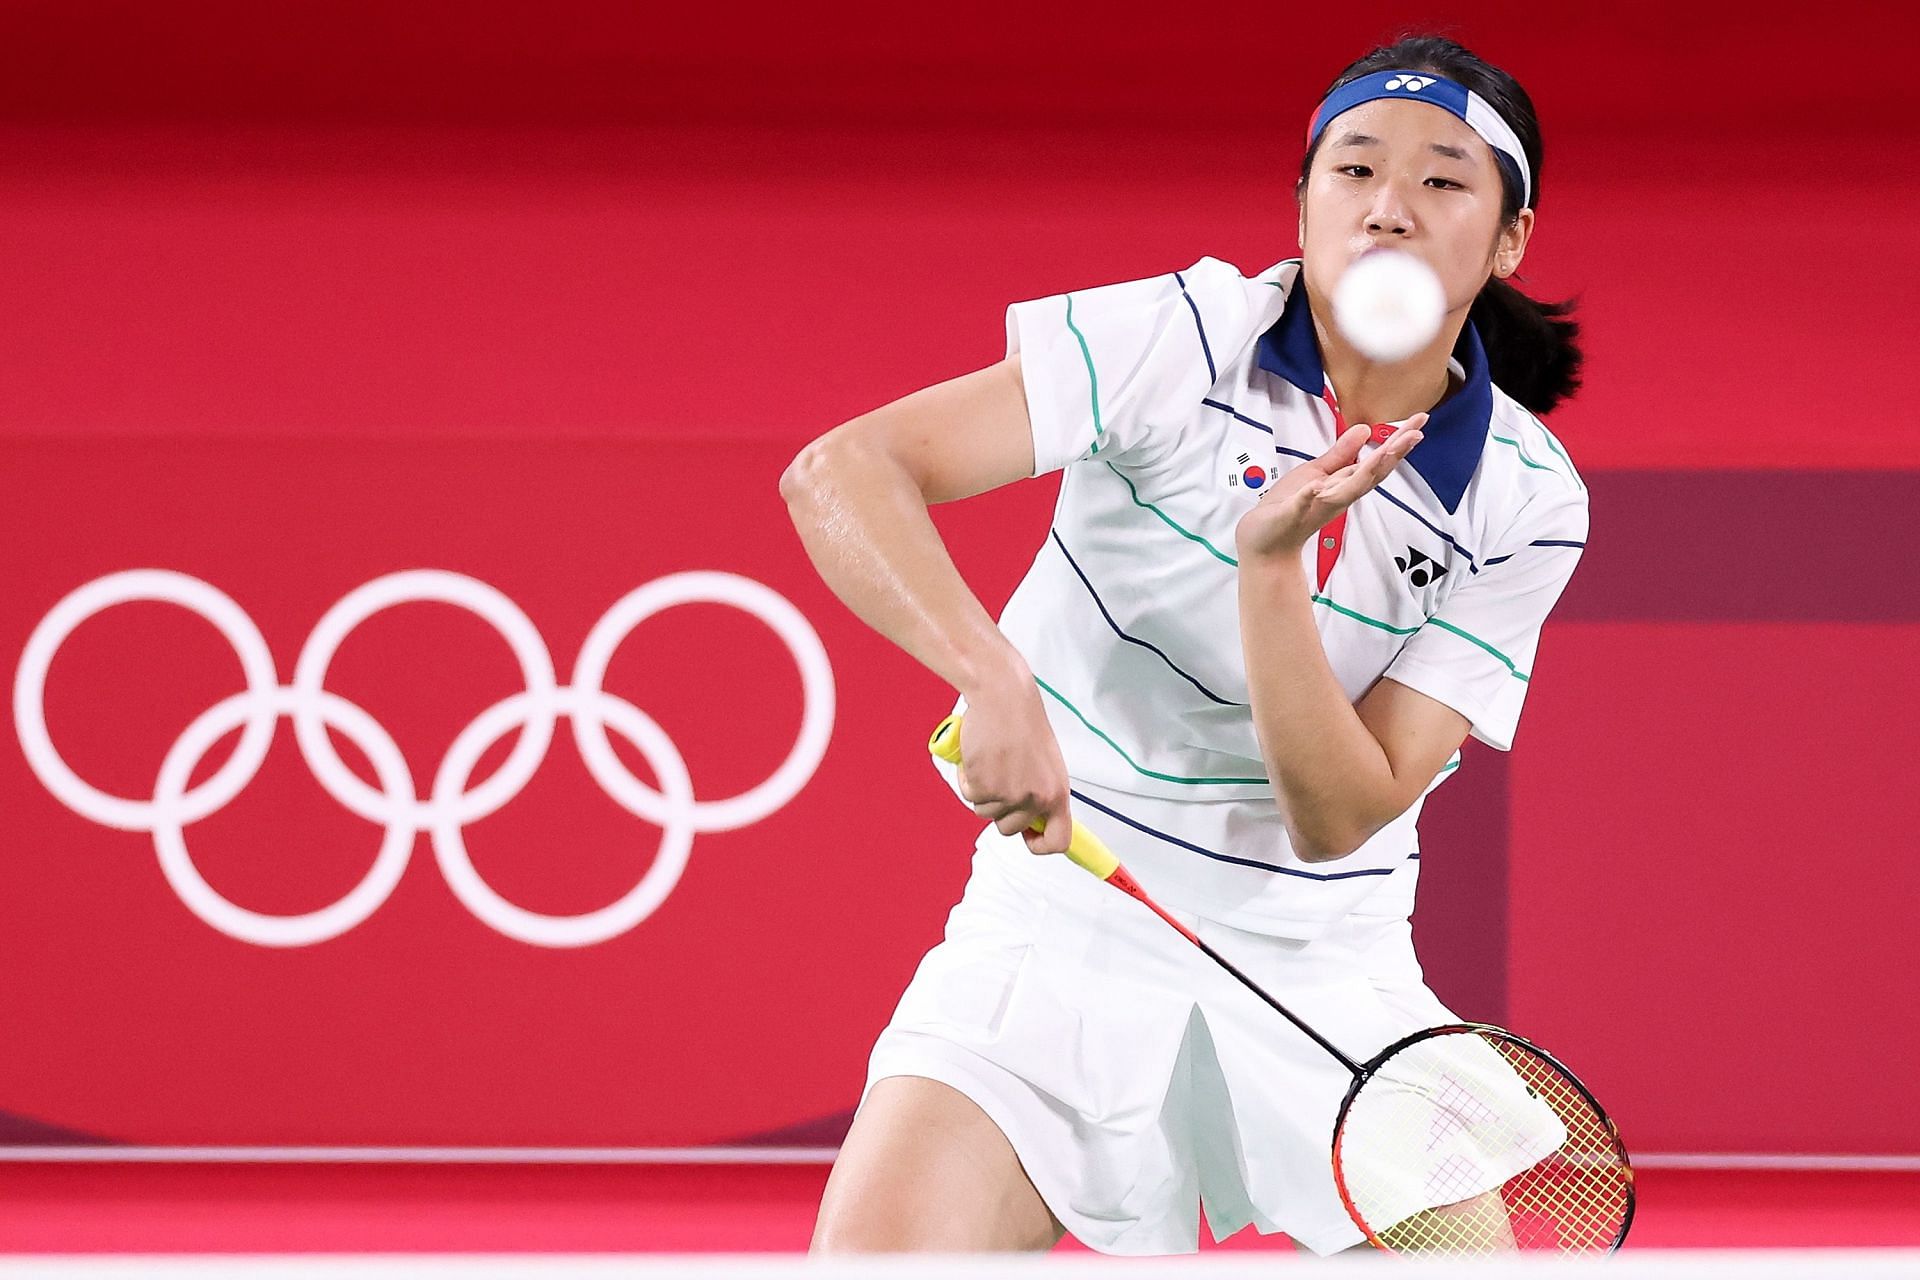 BWF World Tour Finals 2021, PV Sindhu vs An Seyoung final Where to watch, TV schedule, live stream details, and more